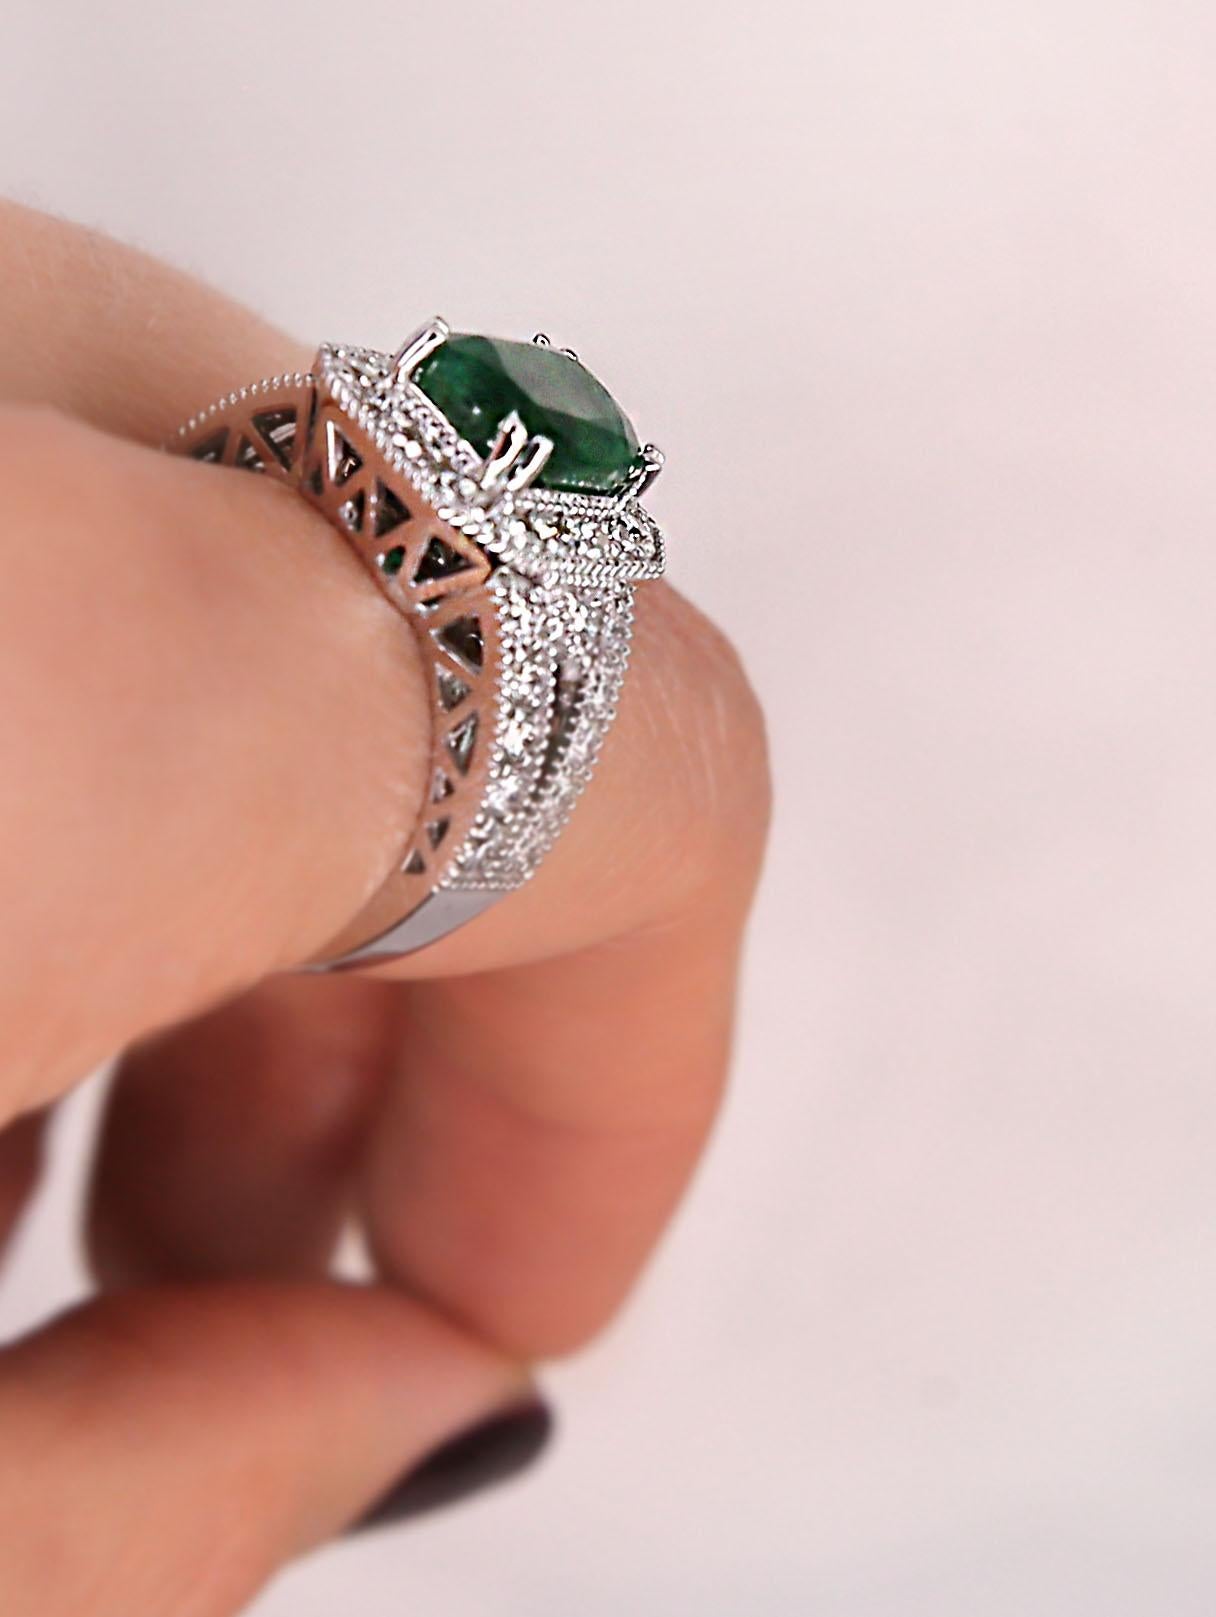 Item Type: Ring

Item Style: Engagement

Material: 18K White Gold

Mainstone: Emerald

Stone Color: Green

Stone Weight: 2.17 Carat

Stone Shape: Oval
Stone Quantity: 1

Stone Dimensions: 9.14x7.32 mm

Stone Creation Method: Natural

Stone Treatment